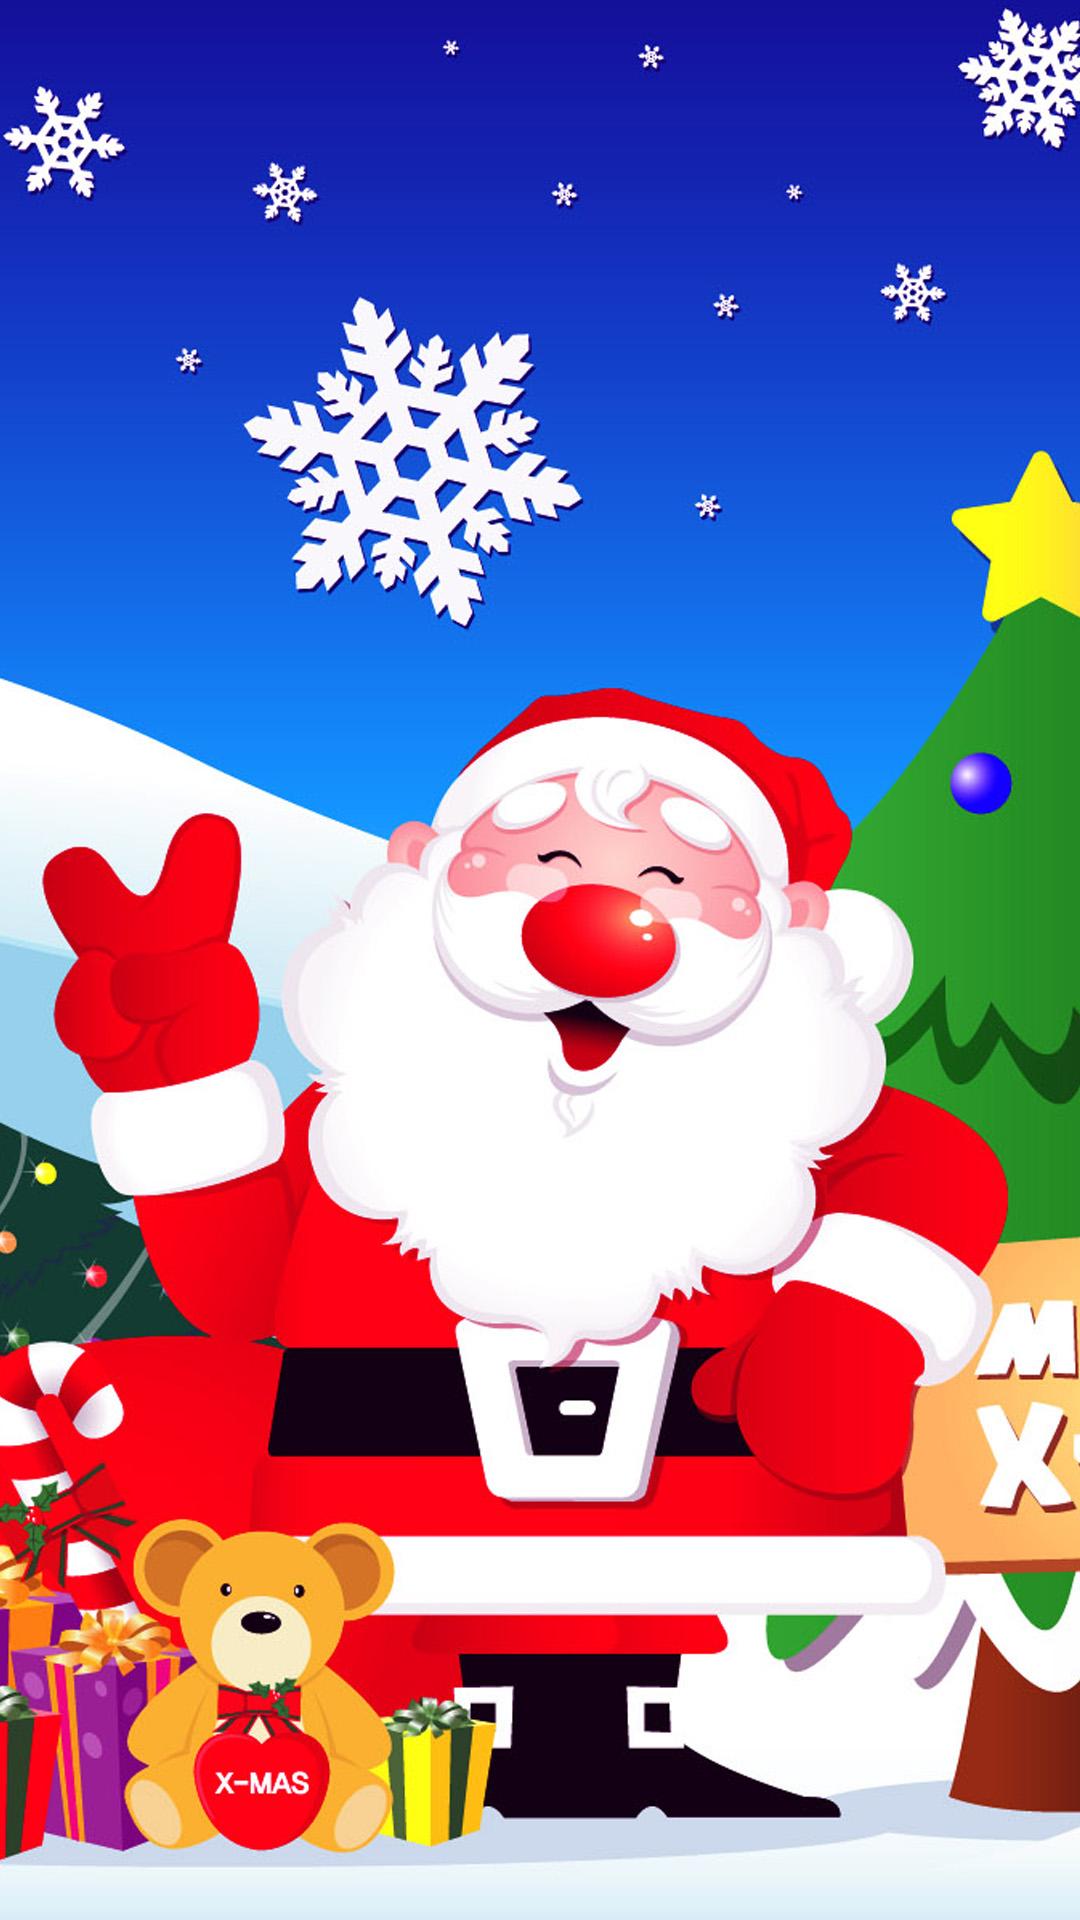 Santa Claus htc one wallpaper, free and easy to download